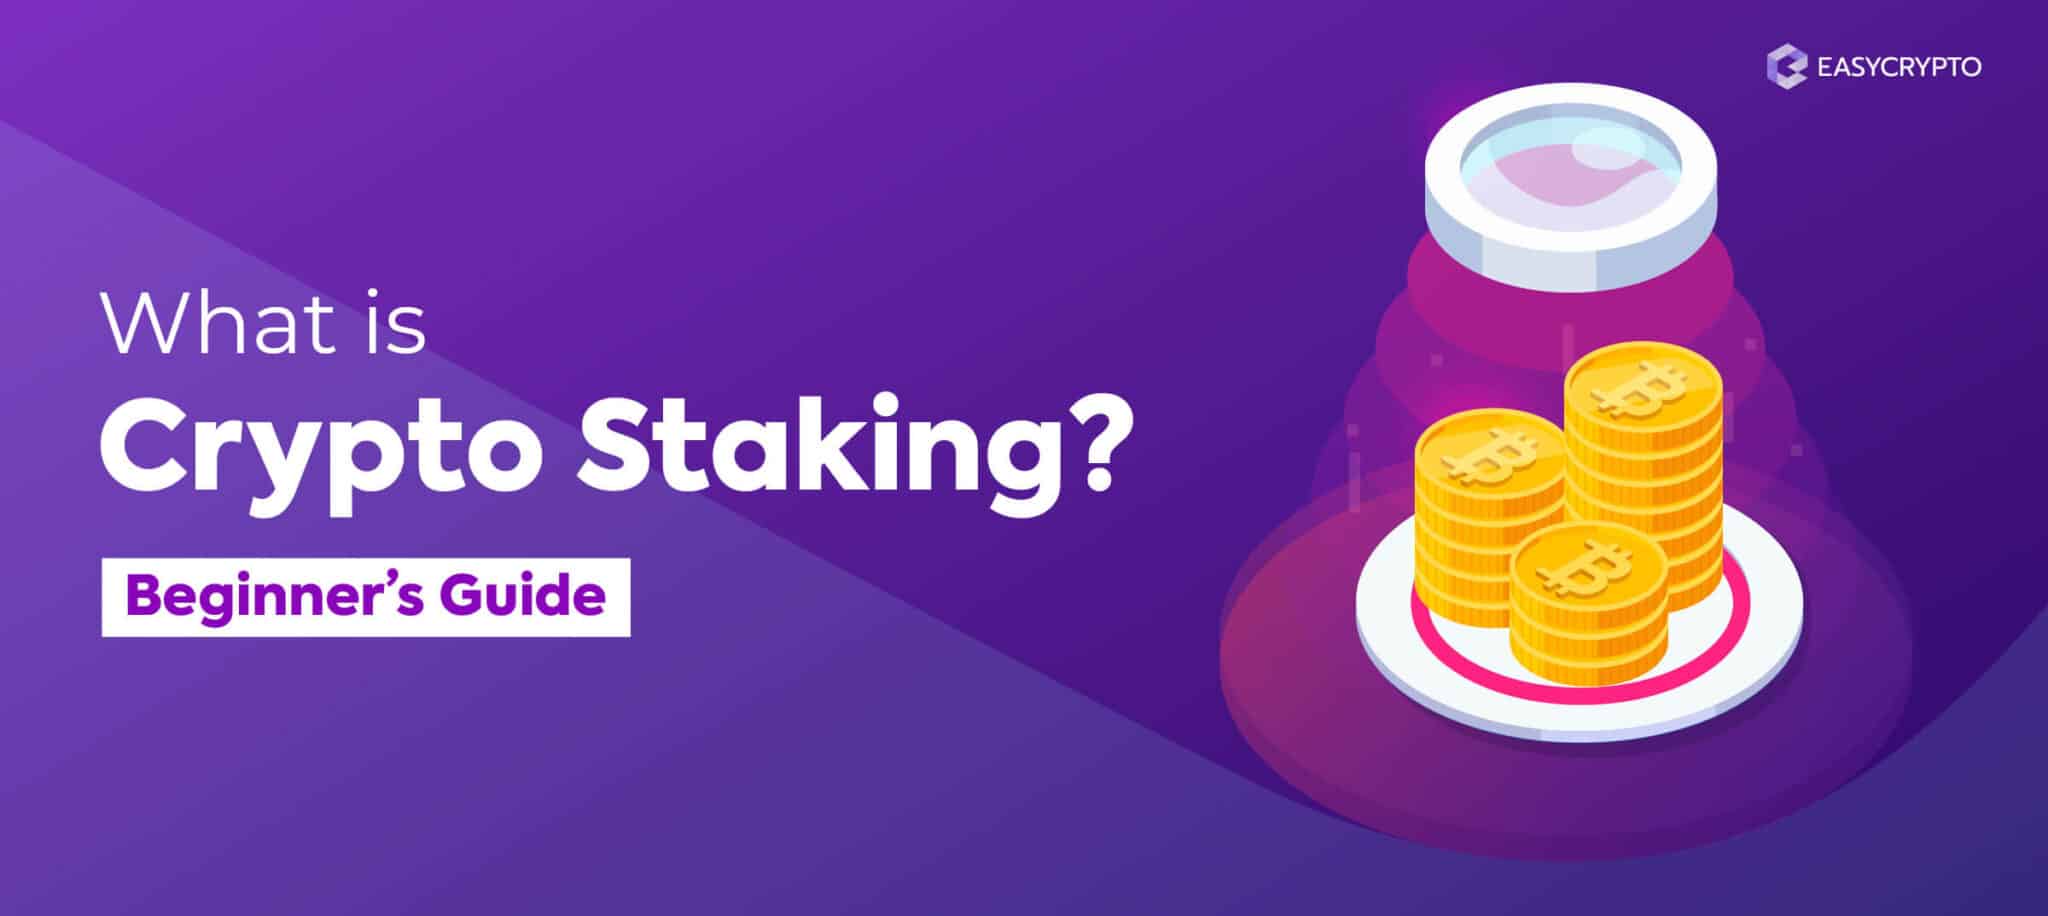 crypto.com staking requirements